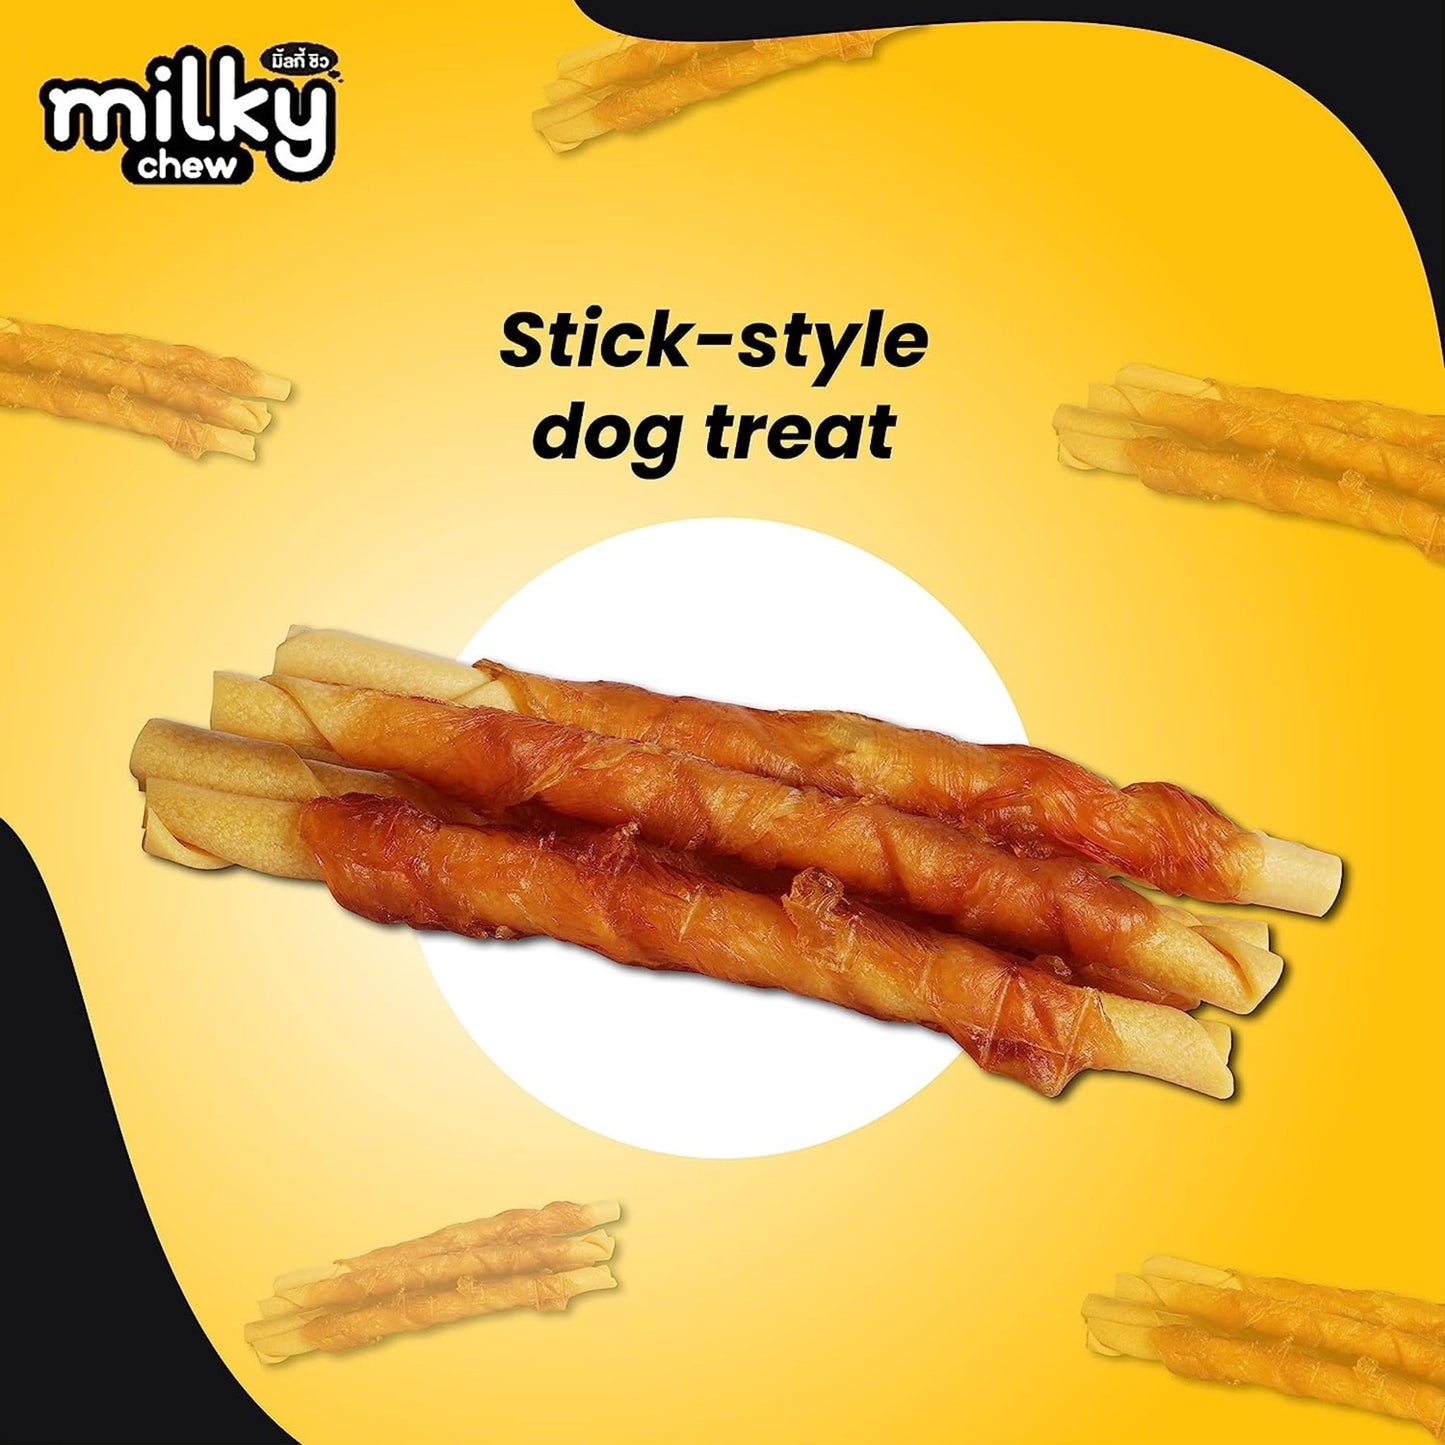 Dogaholic Milky Chew Cheese & Chicken Stick 10in1 Dog Treat, Pack of 3